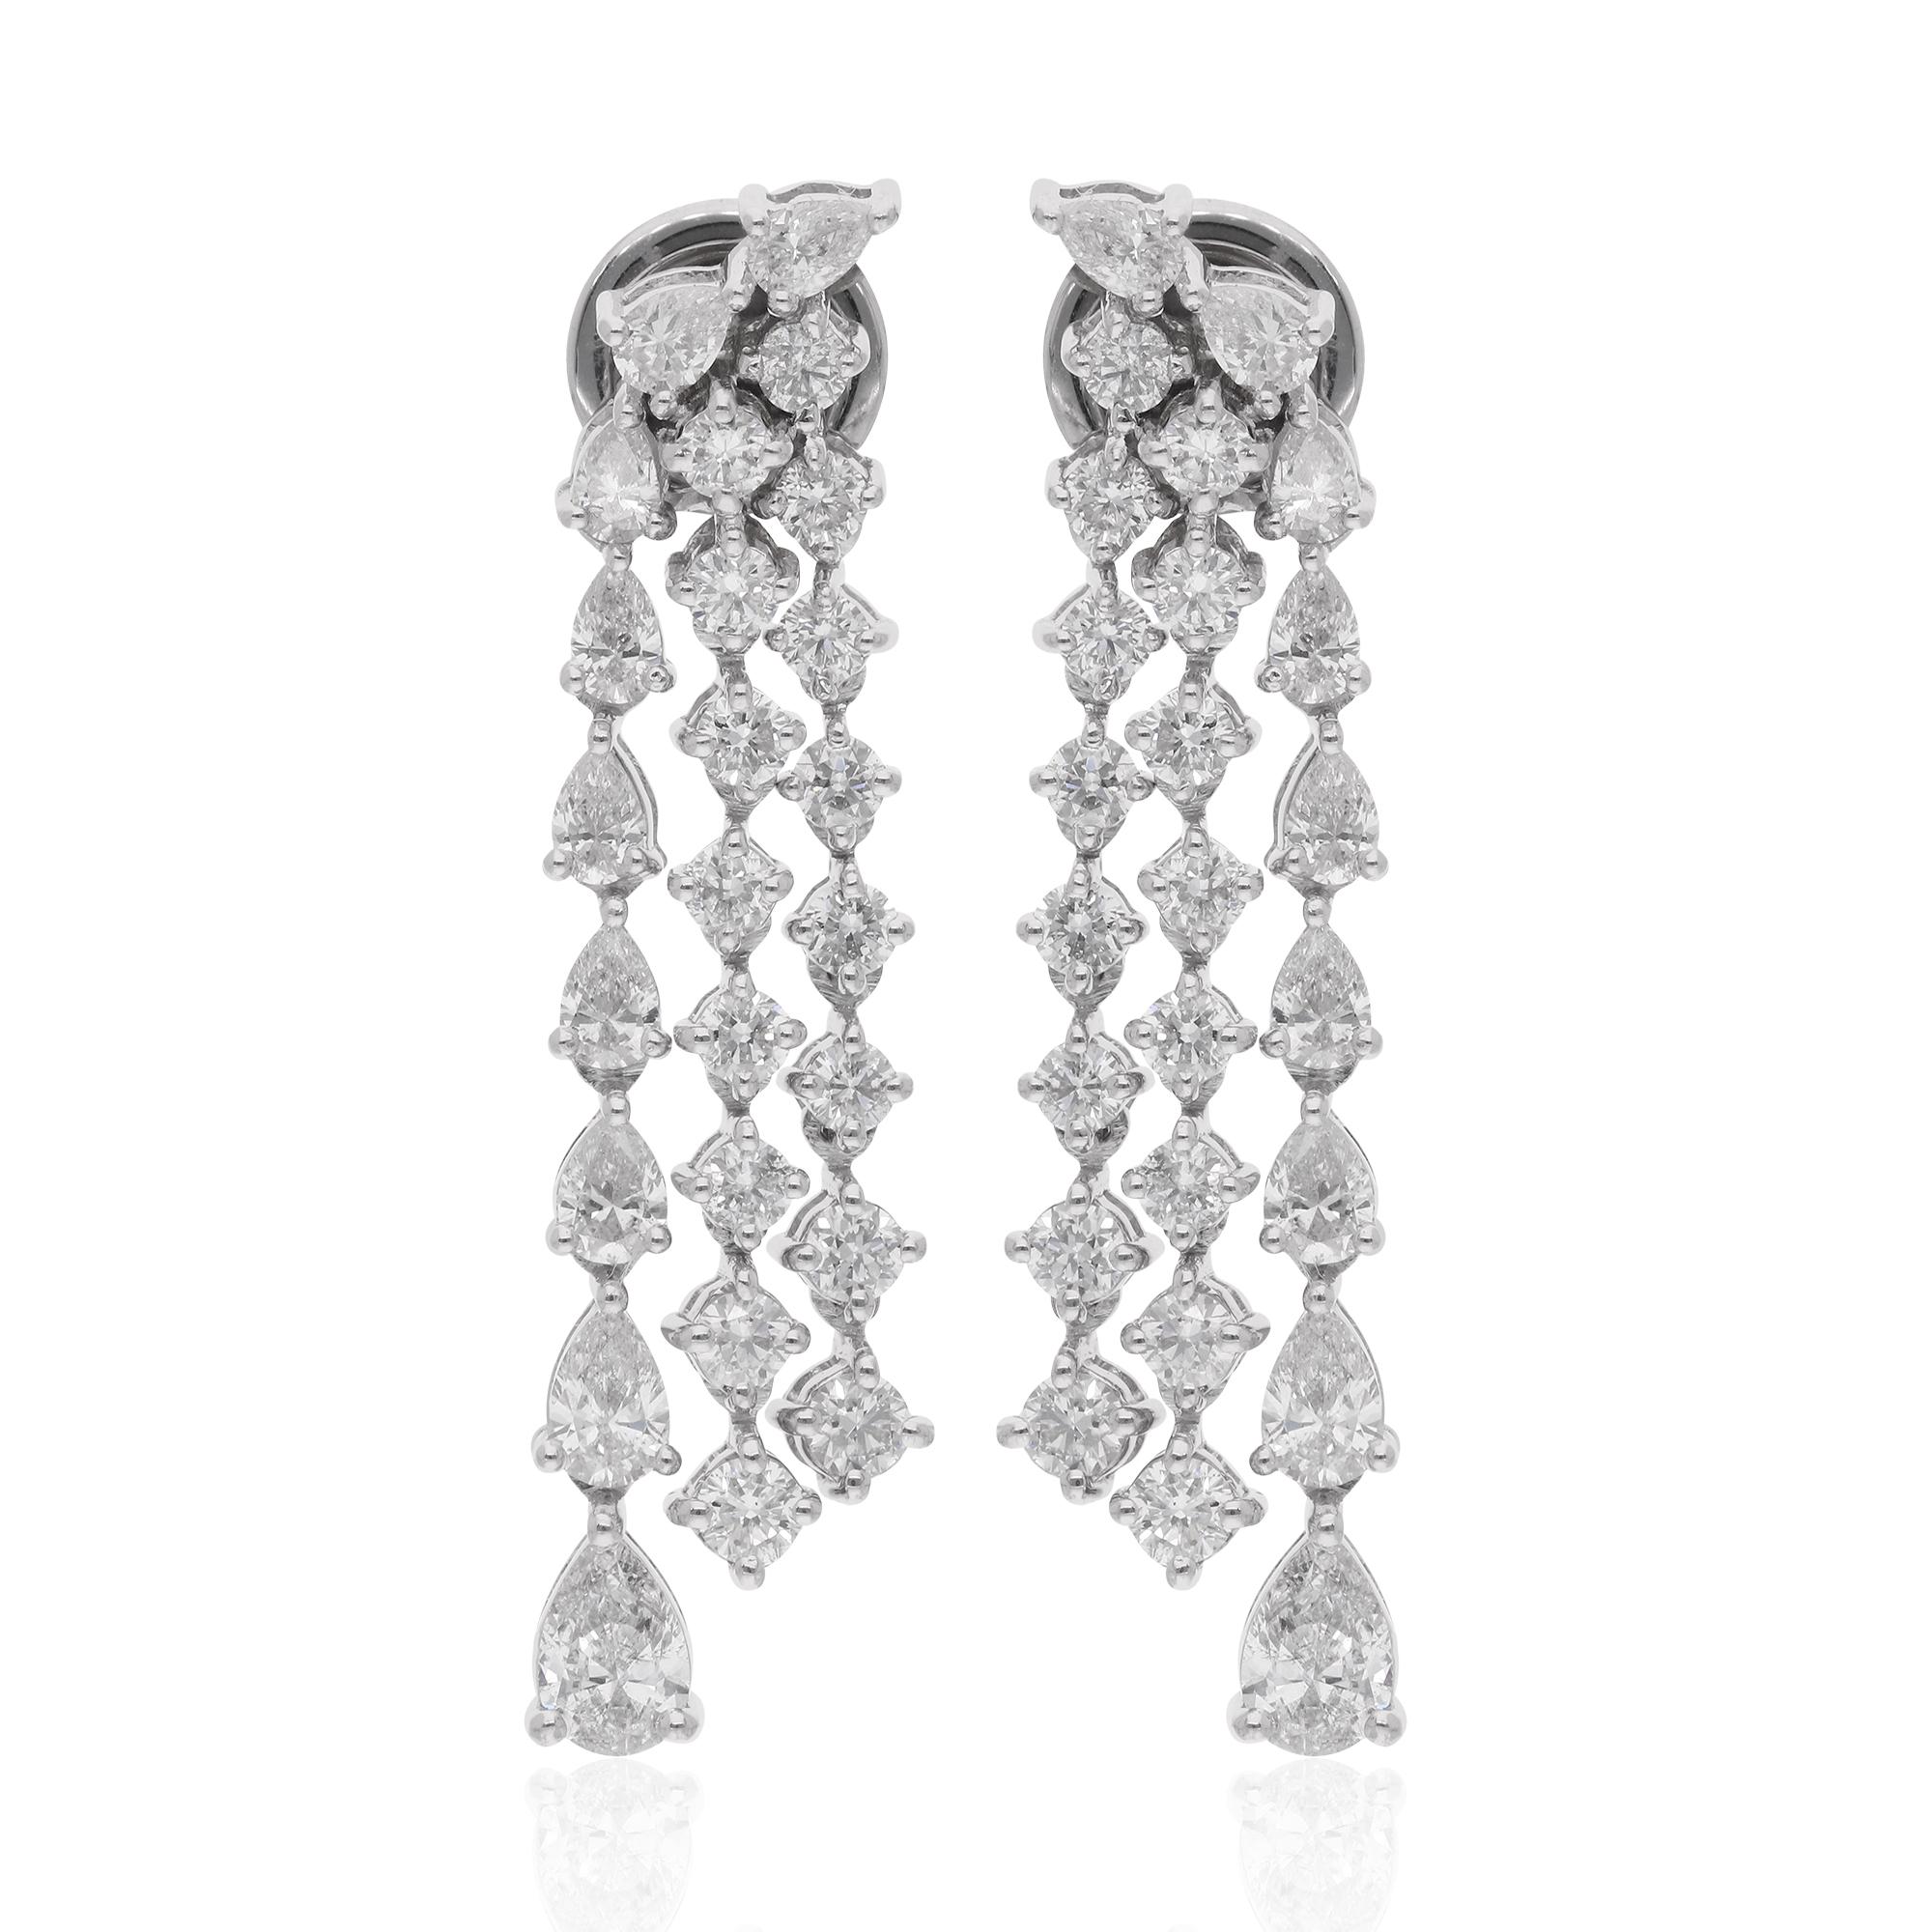 These exquisite chandelier earrings are crafted in 18 karat white gold and feature a captivating combination of pear-shaped and round diamonds with a total carat weight of 2.76 carats. The pear-shaped diamonds, known for their elegant and elongated